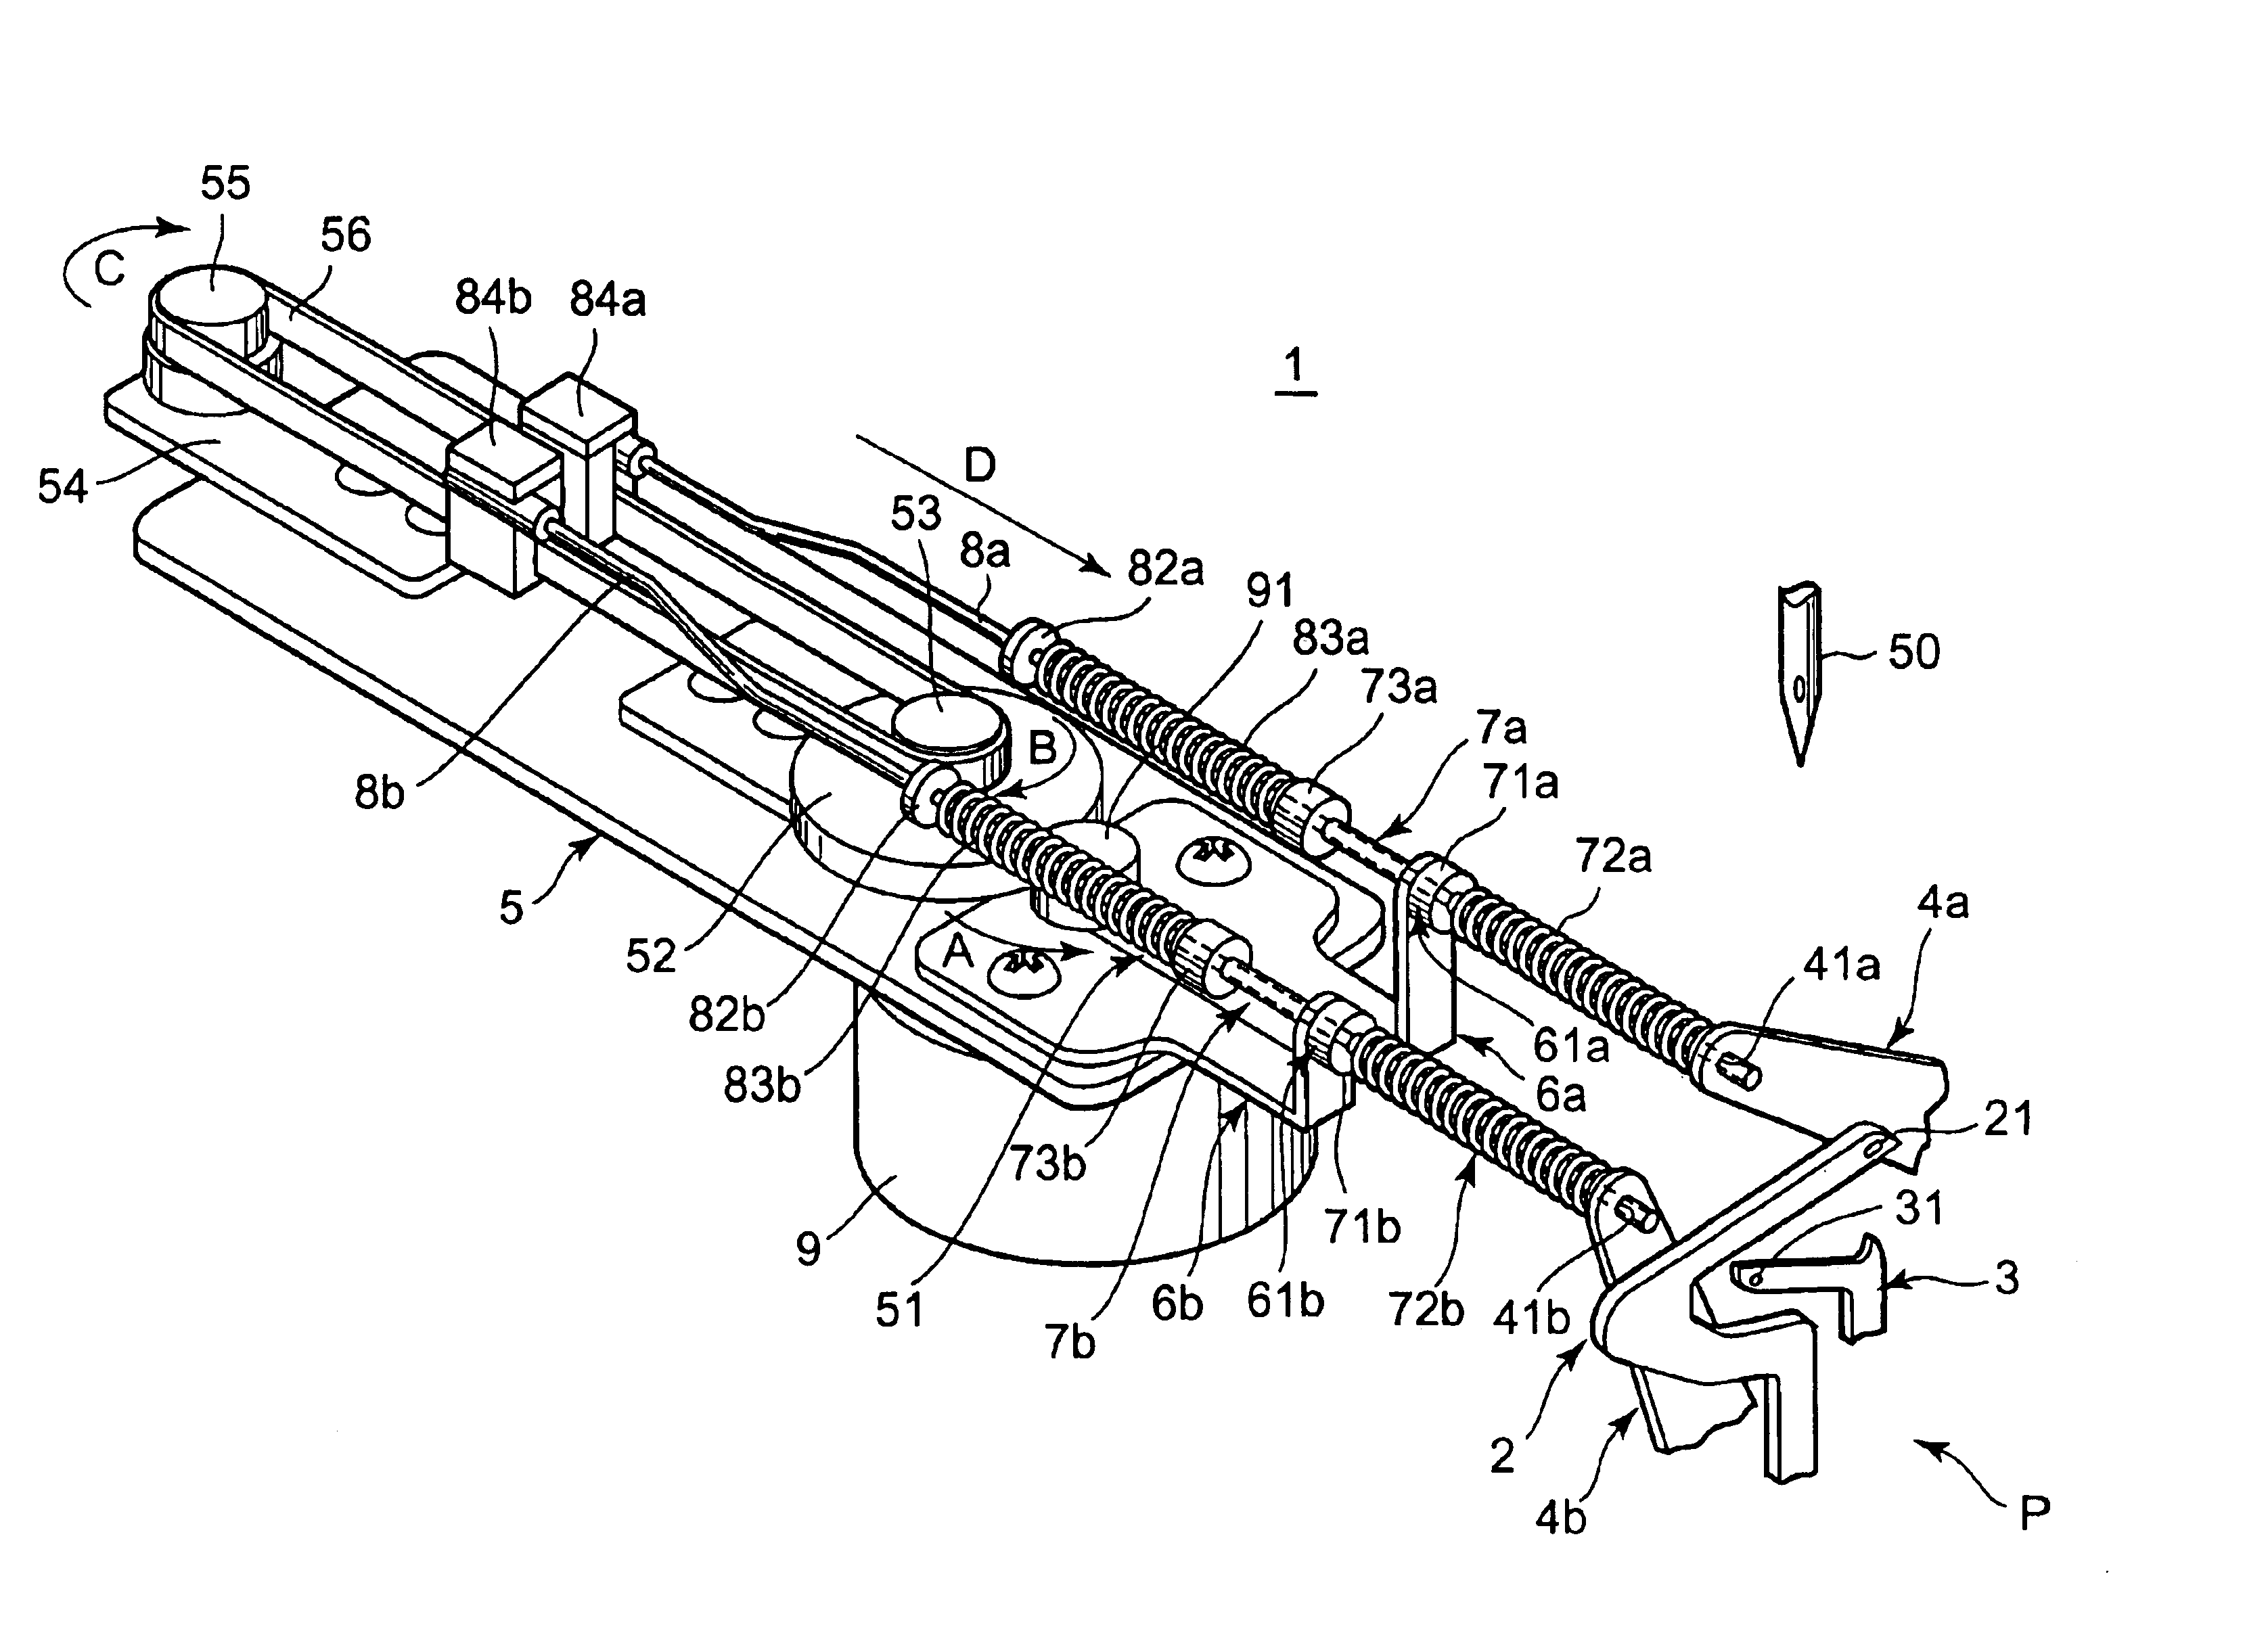 Looper threading apparatus for sewing machine